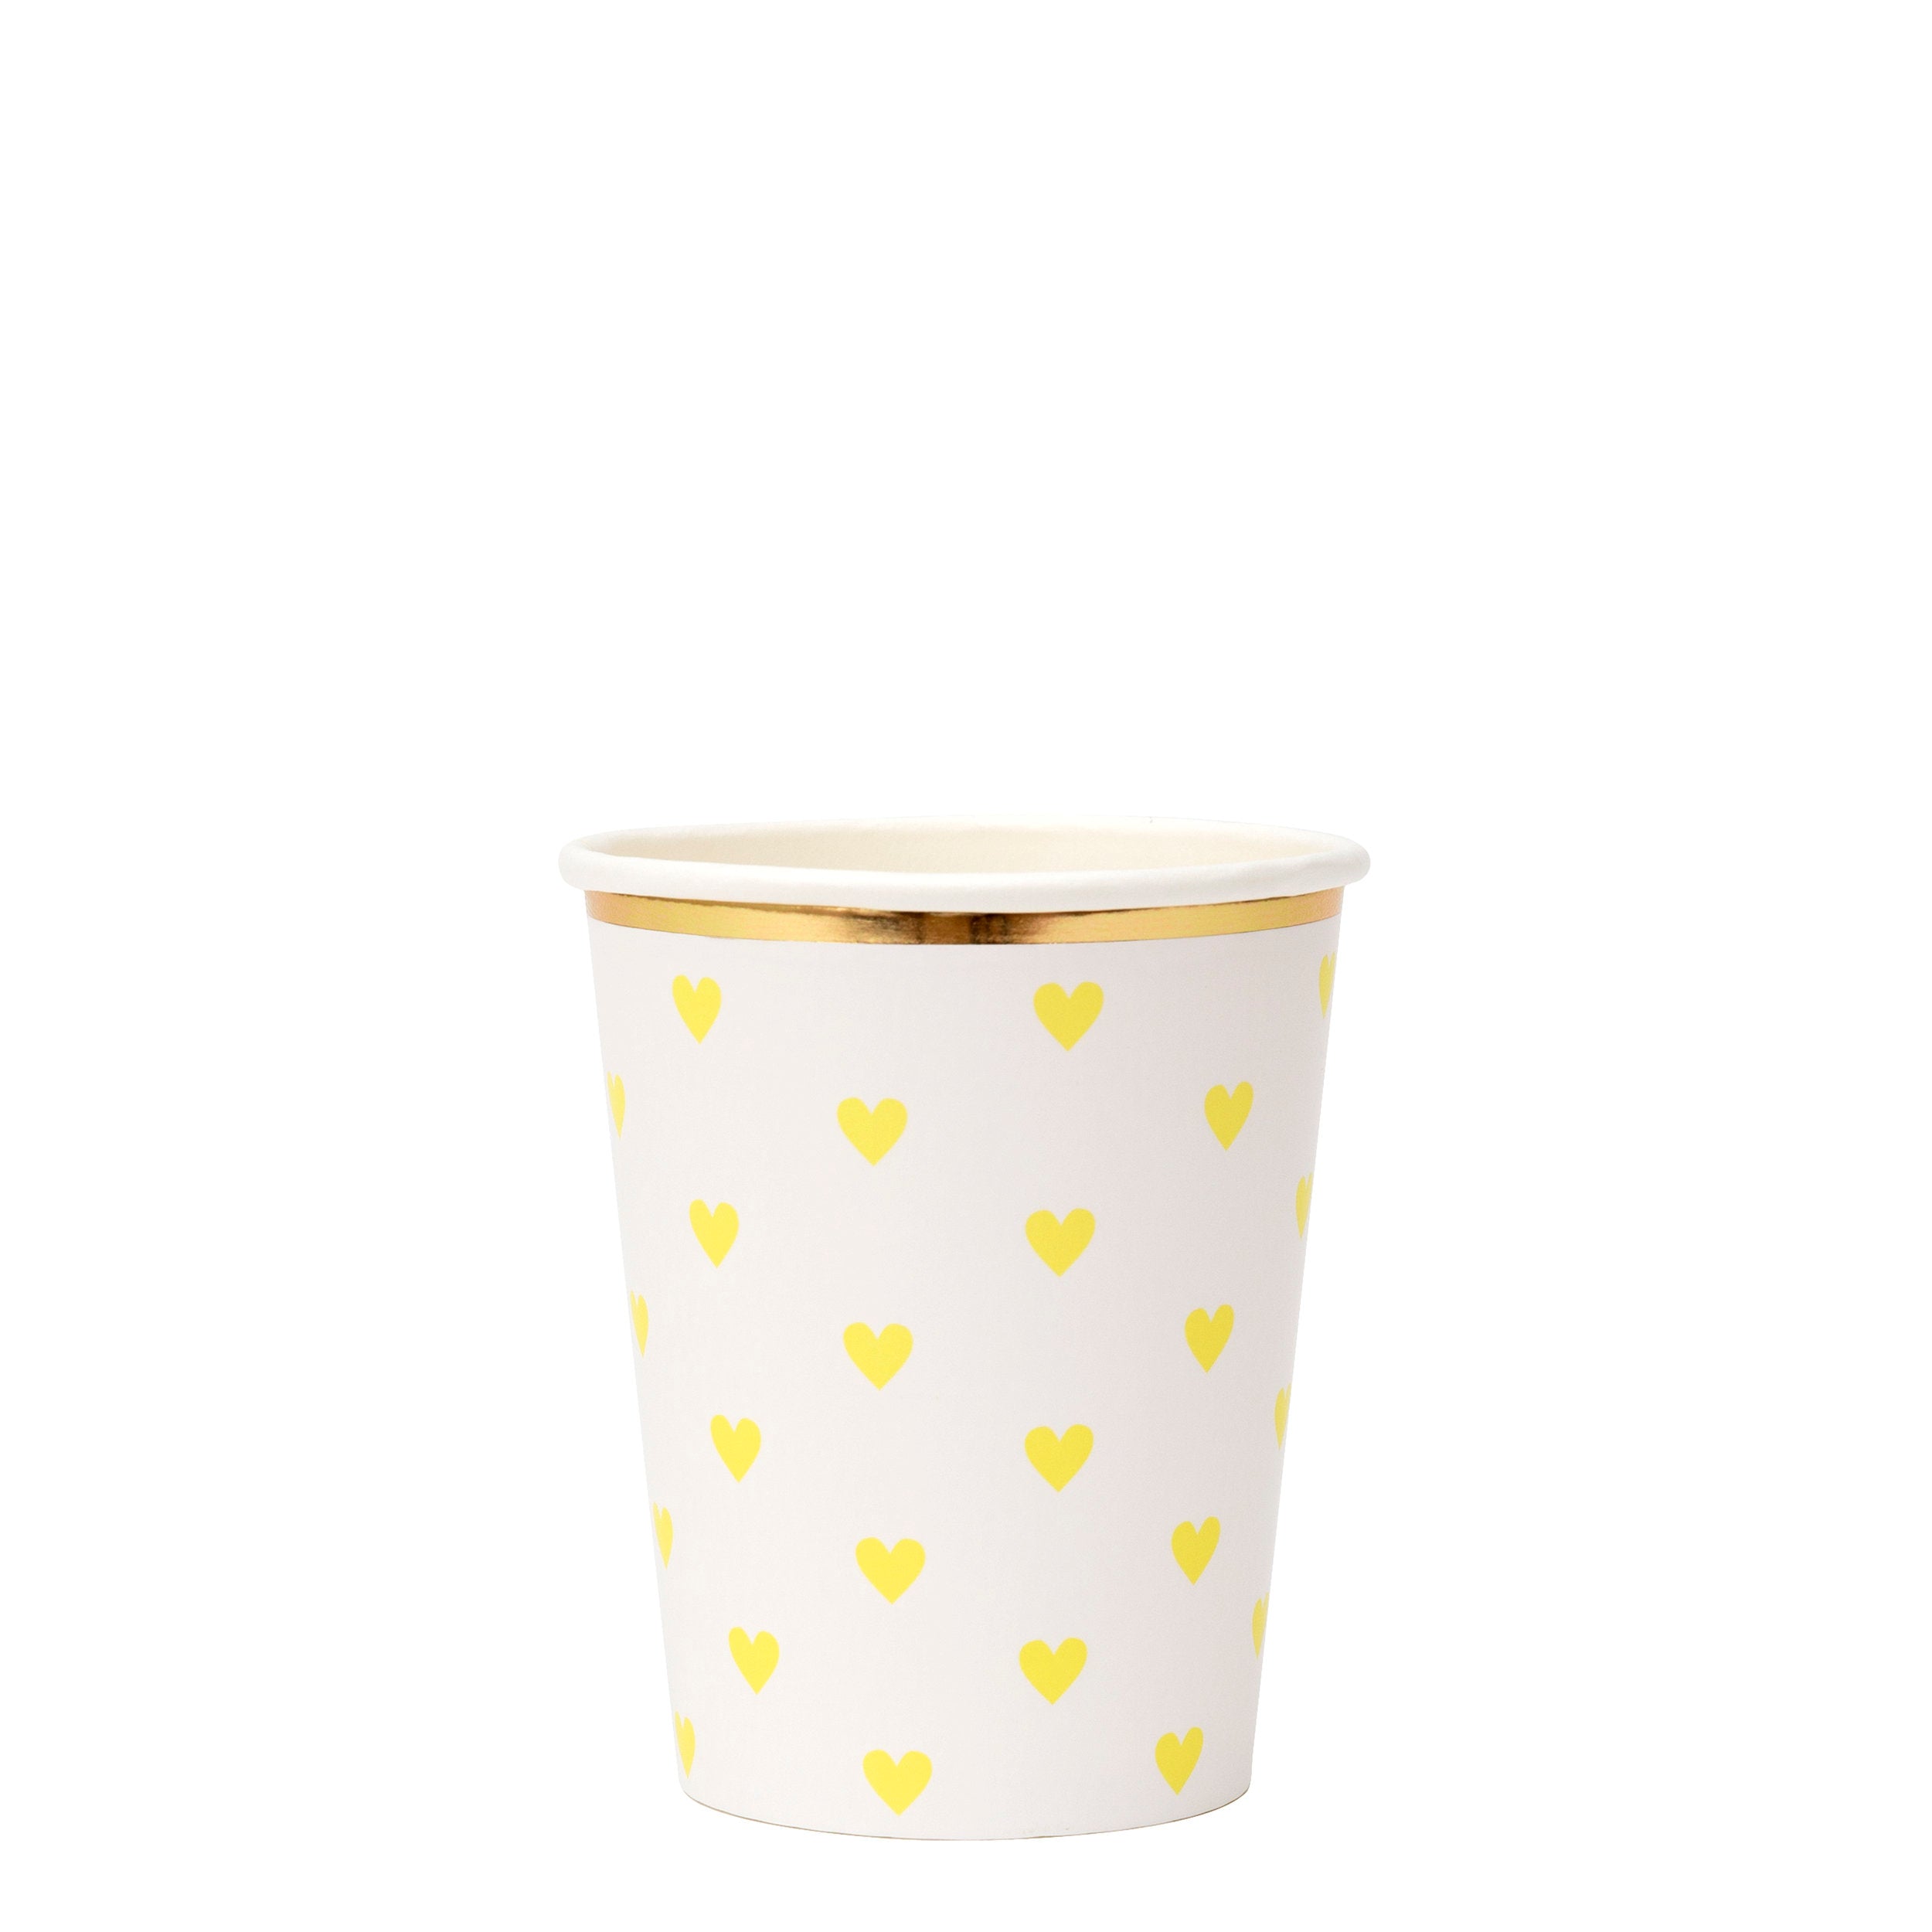 PARTY PALETTE HEART | PAPER CUPS